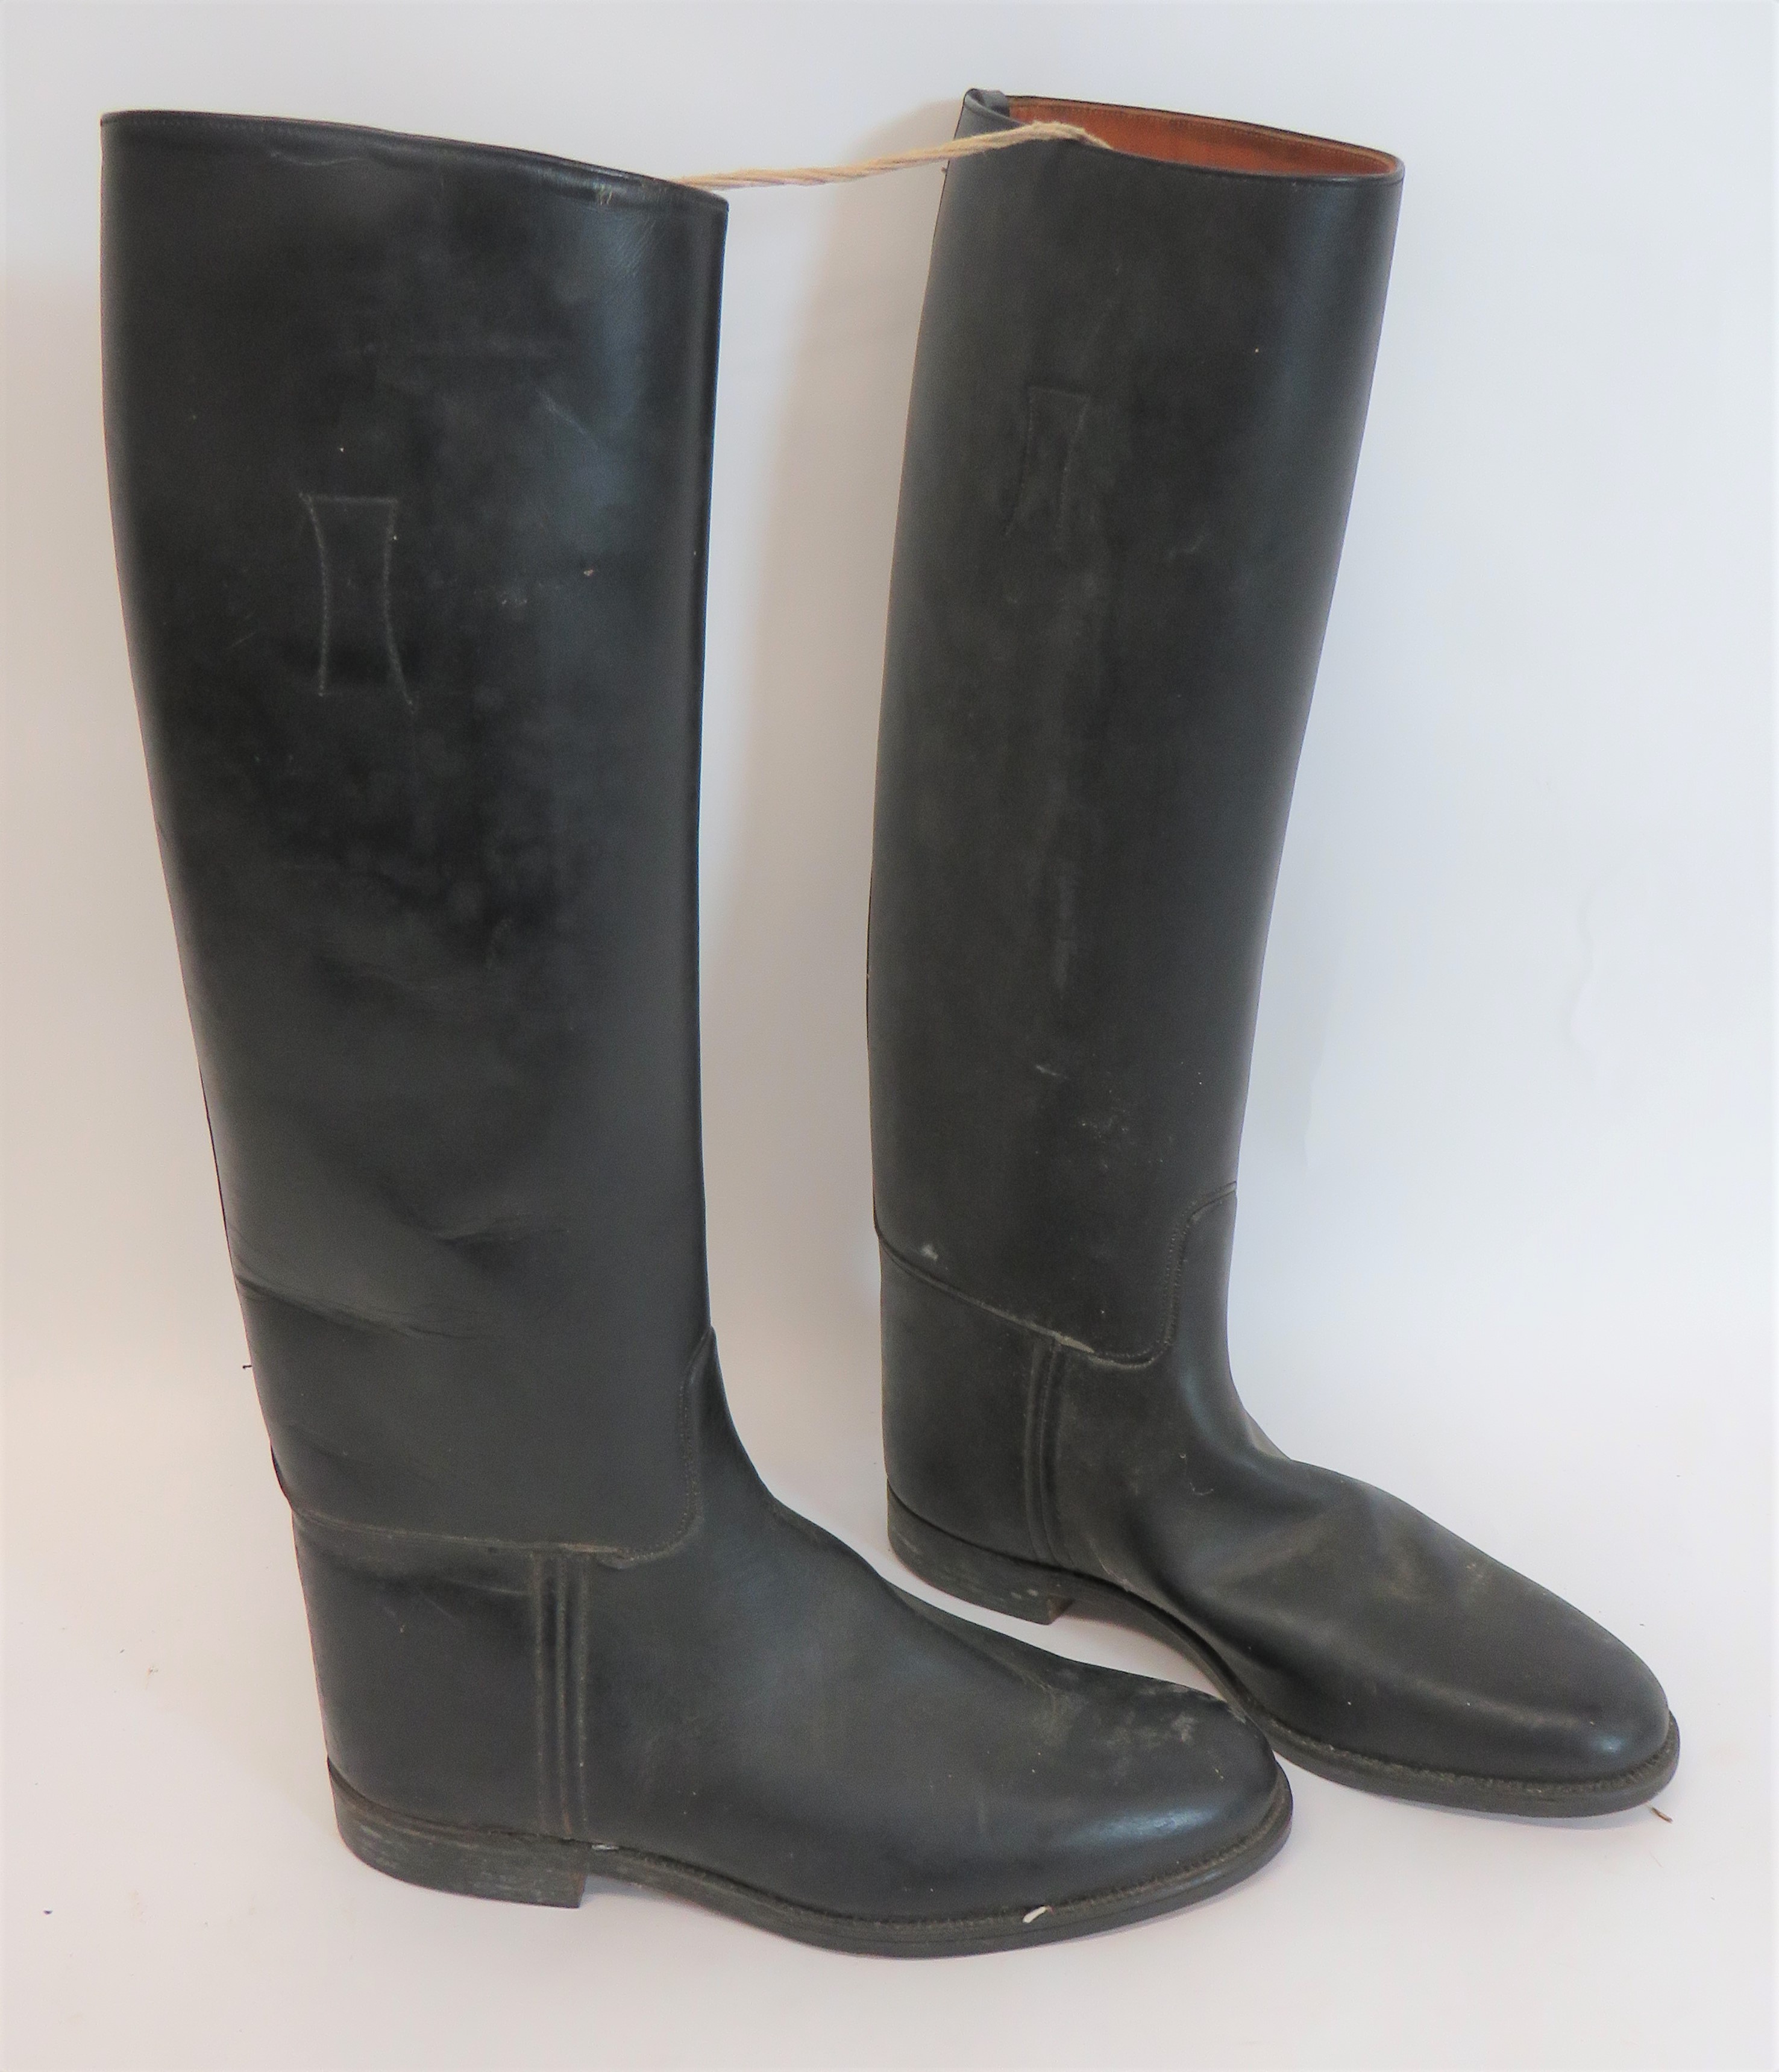 Pair of Cavalry Pattern Leather Boots black leather, high leg boots.  Leather soles and heels. - Image 2 of 2